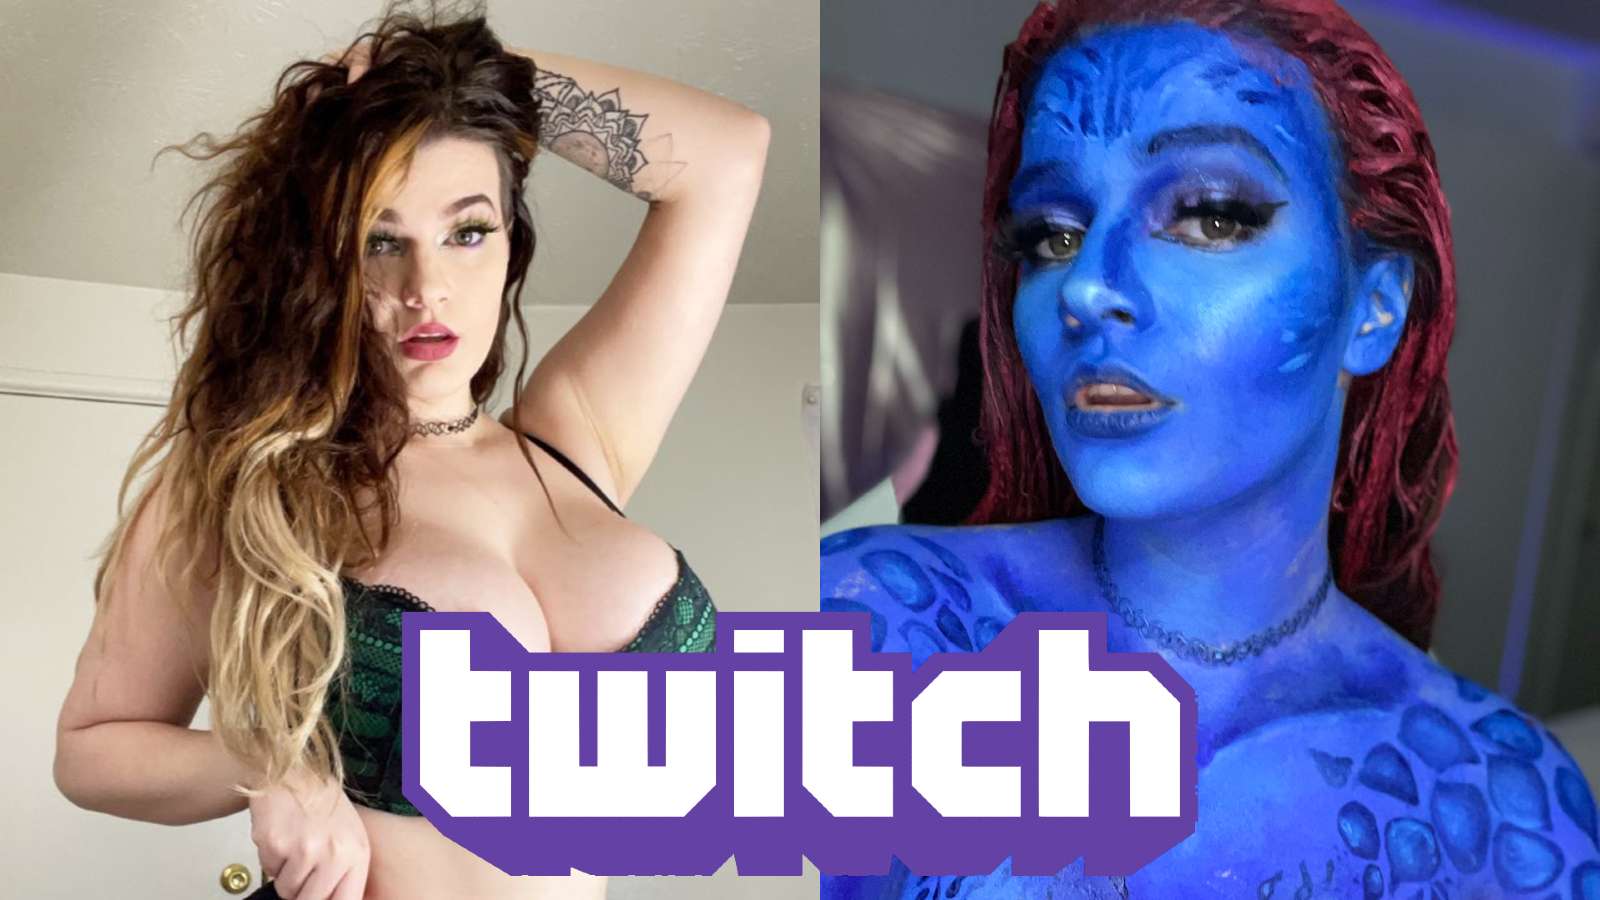 Body painter DelightDaniTV hits back at Twitch permaban